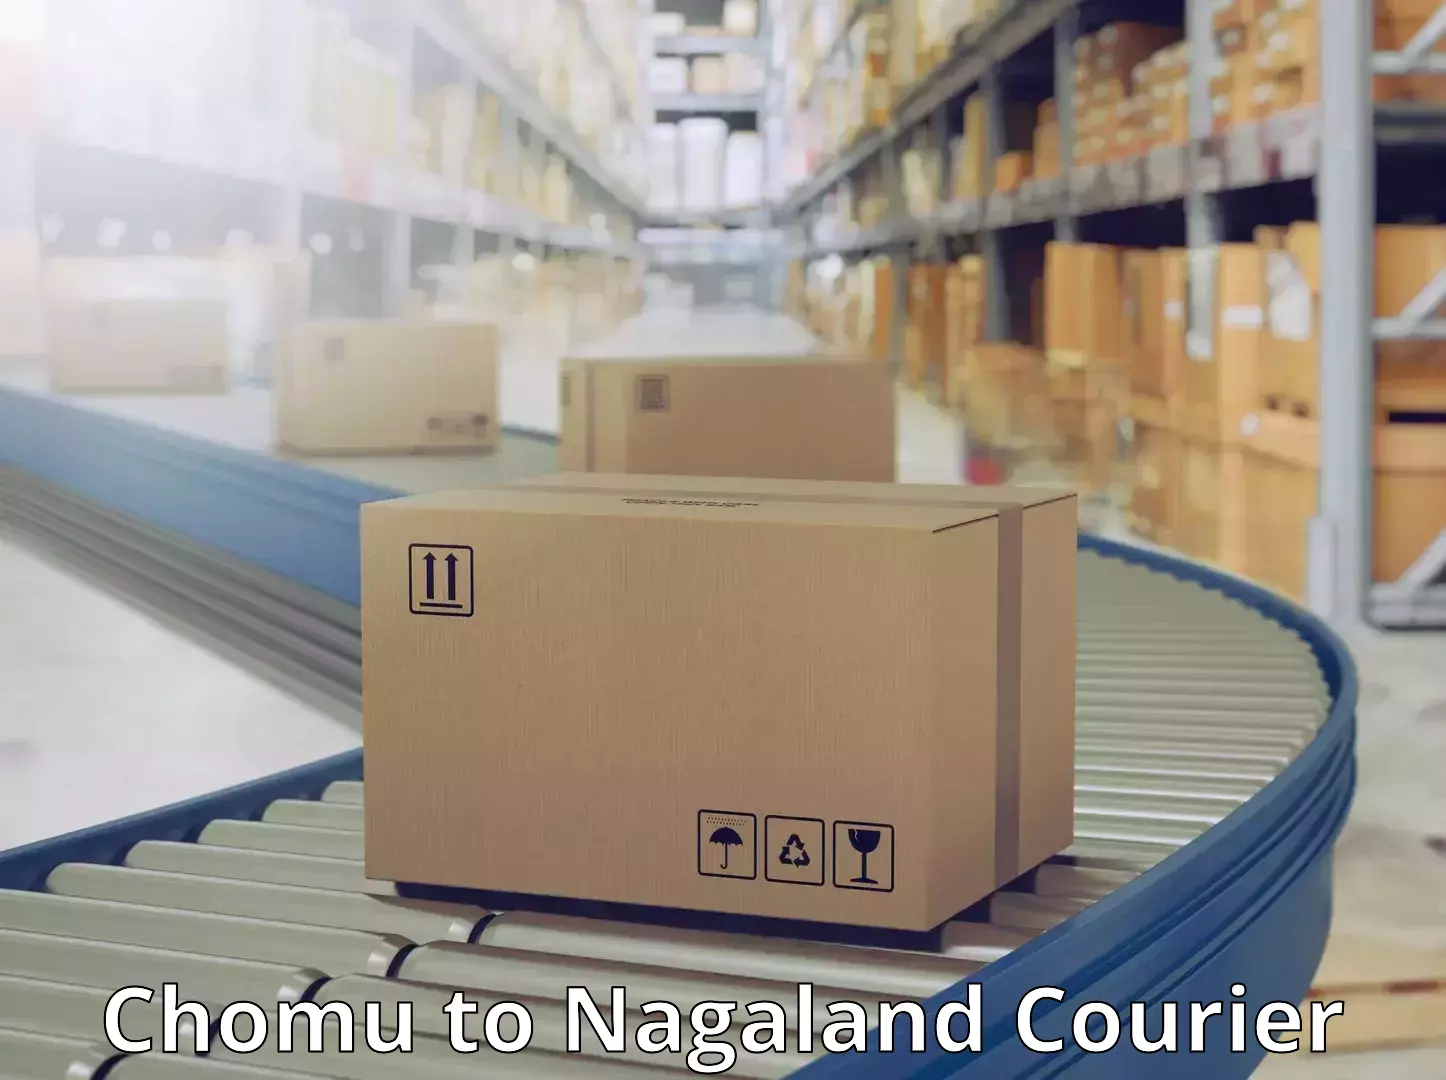 Courier service efficiency Chomu to Nagaland